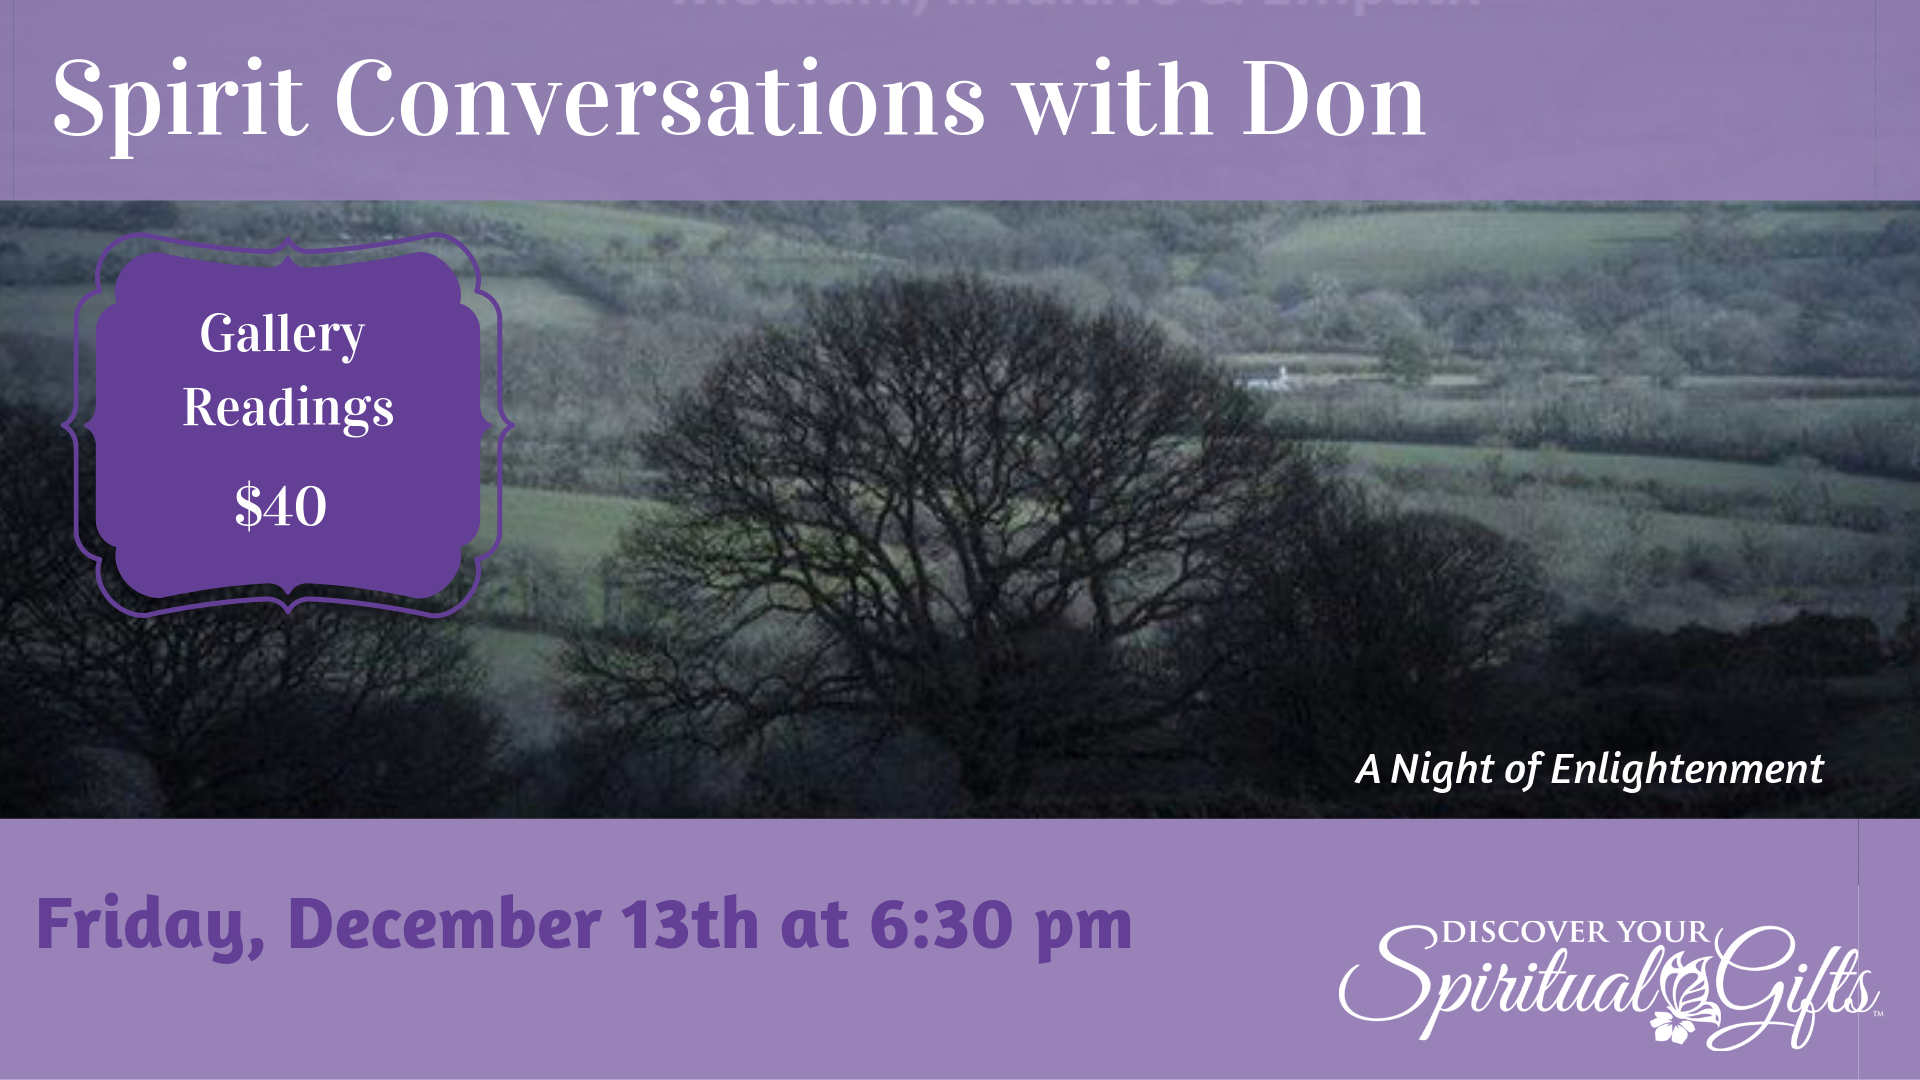 Spiritual Conversations with Don: A Night of Enlightenment